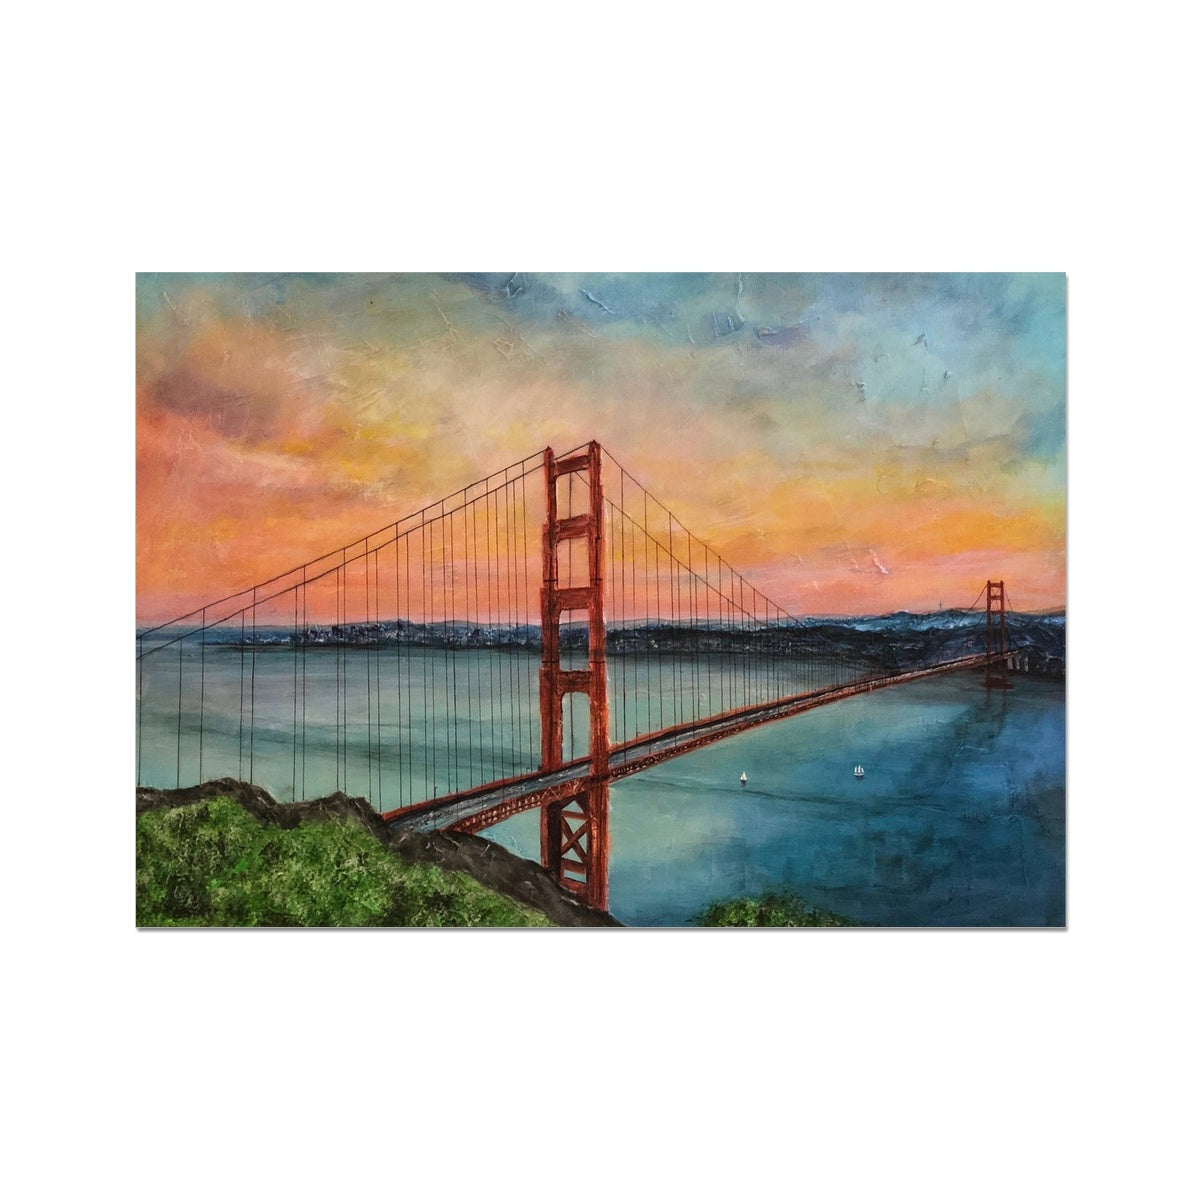 The Golden Gate Bridge Painting | Fine Art Prints From Scotland-Unframed Prints-World Art Gallery-A2 Landscape-Paintings, Prints, Homeware, Art Gifts From Scotland By Scottish Artist Kevin Hunter